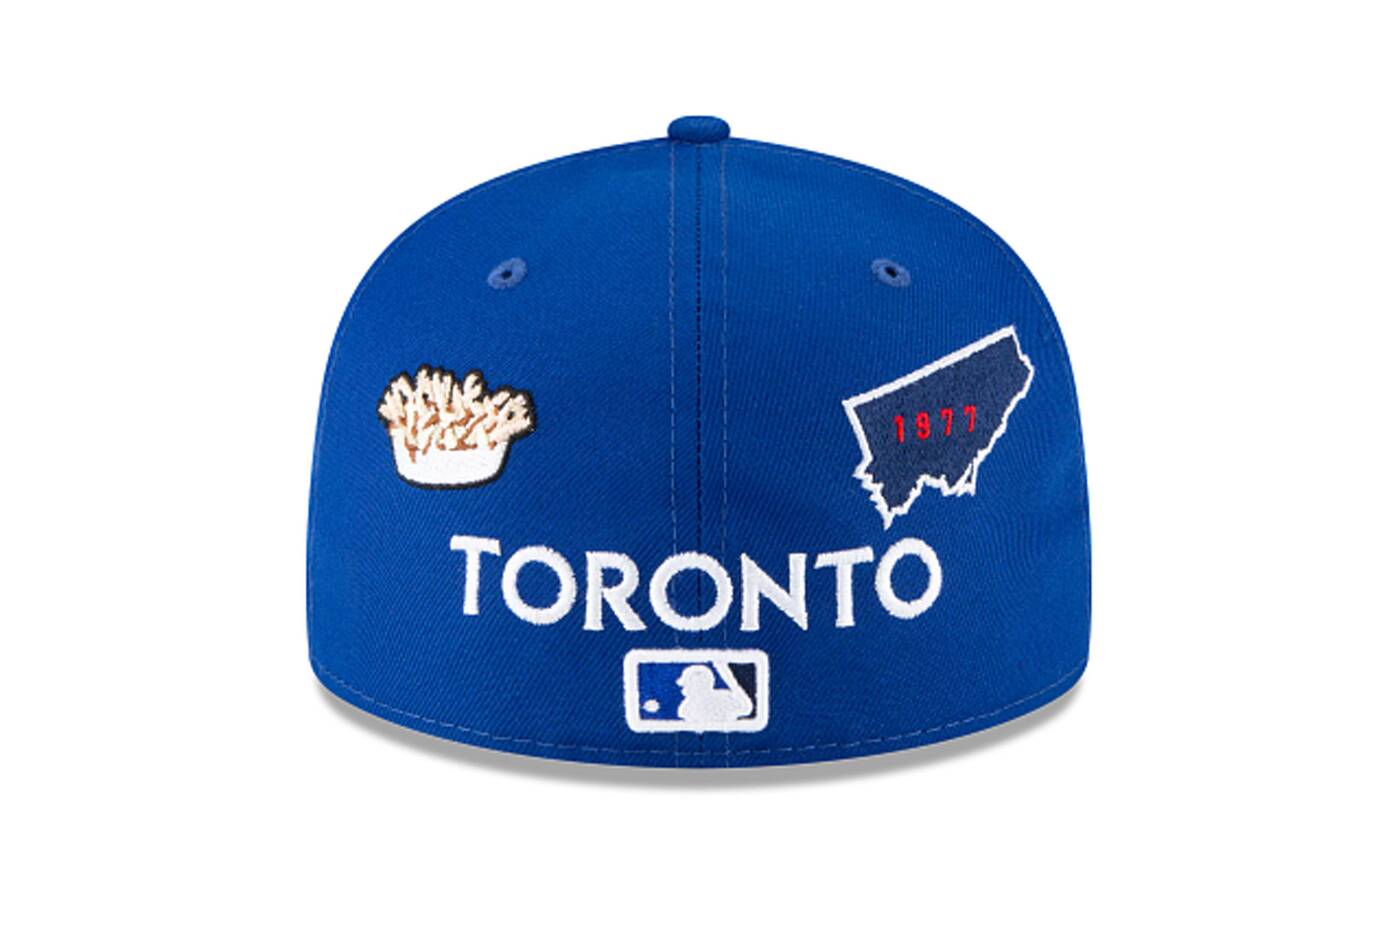 Drooling' Blue Jays cap sold out in days after outrage online